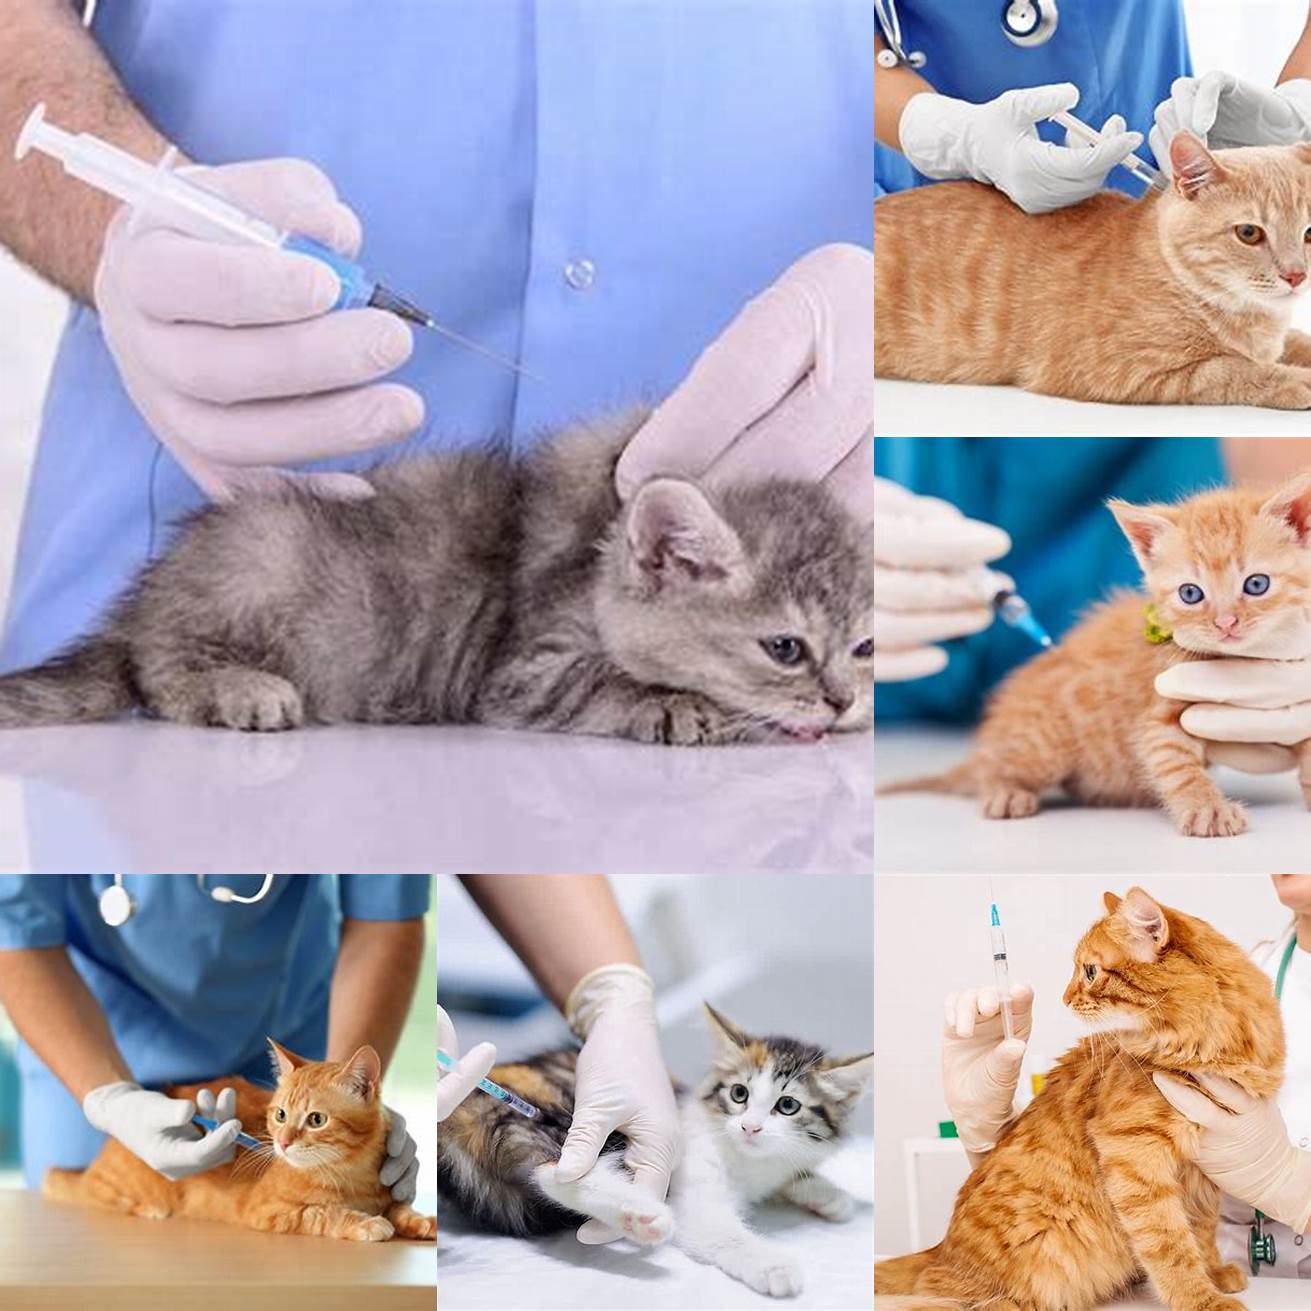 Get your cat vaccinated